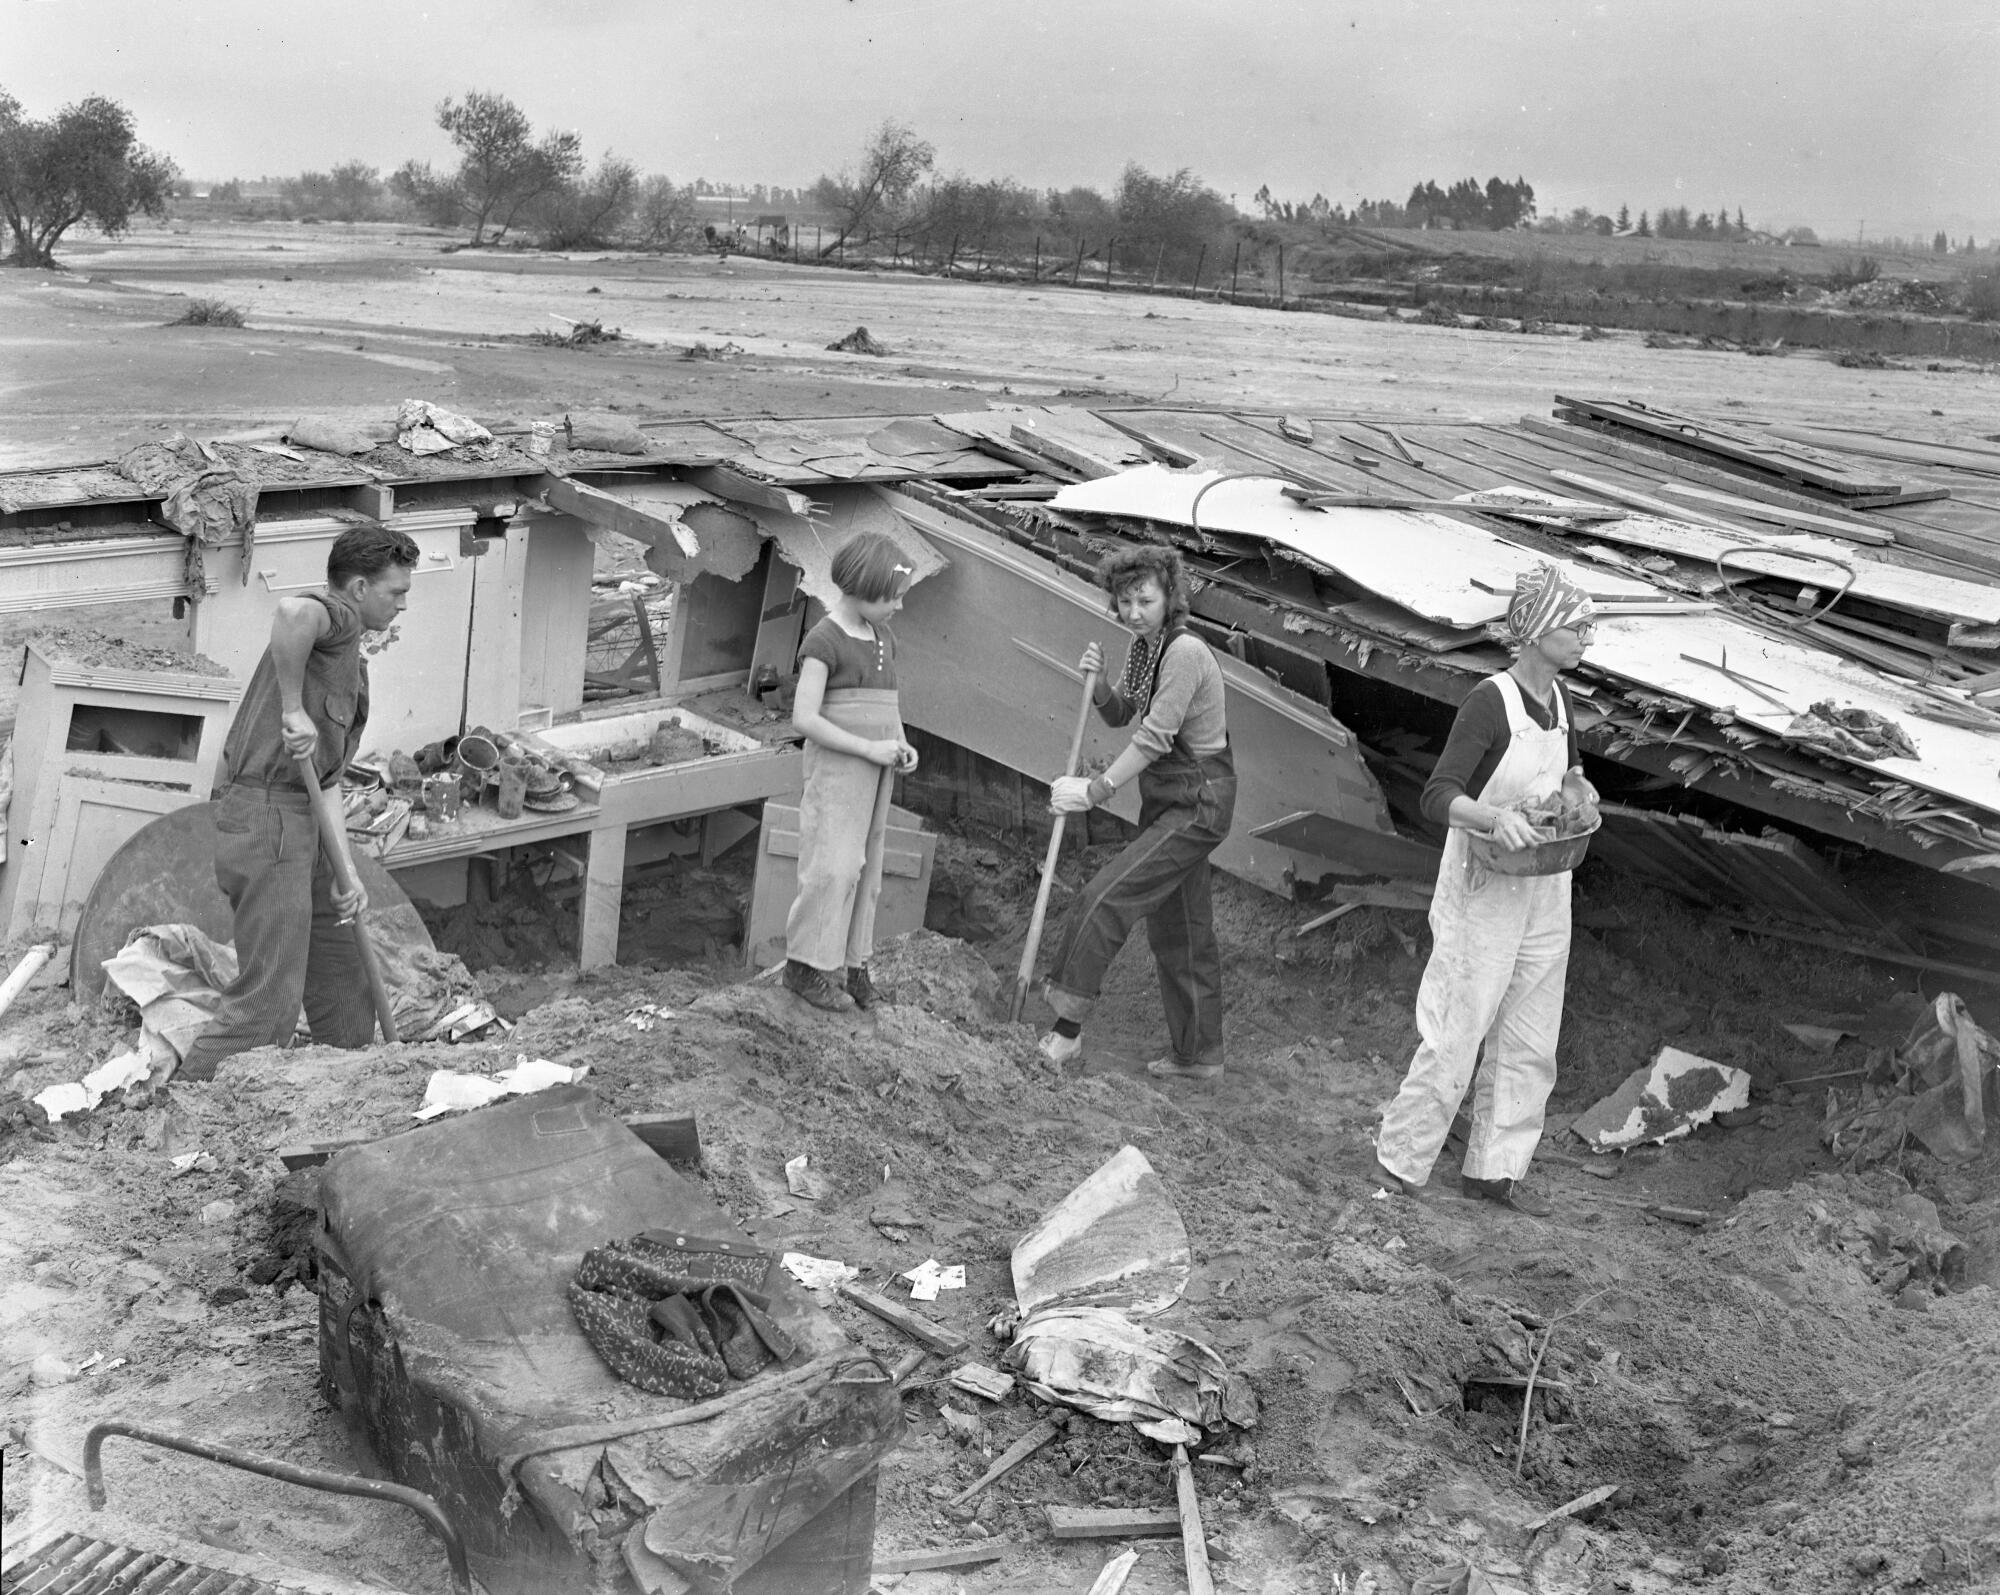 March 7, 1938: Mr. and Mrs. J. L. Smith, their daughter and 5-year-old granddaughter dig out a flood-ruined home in Van Nuys.